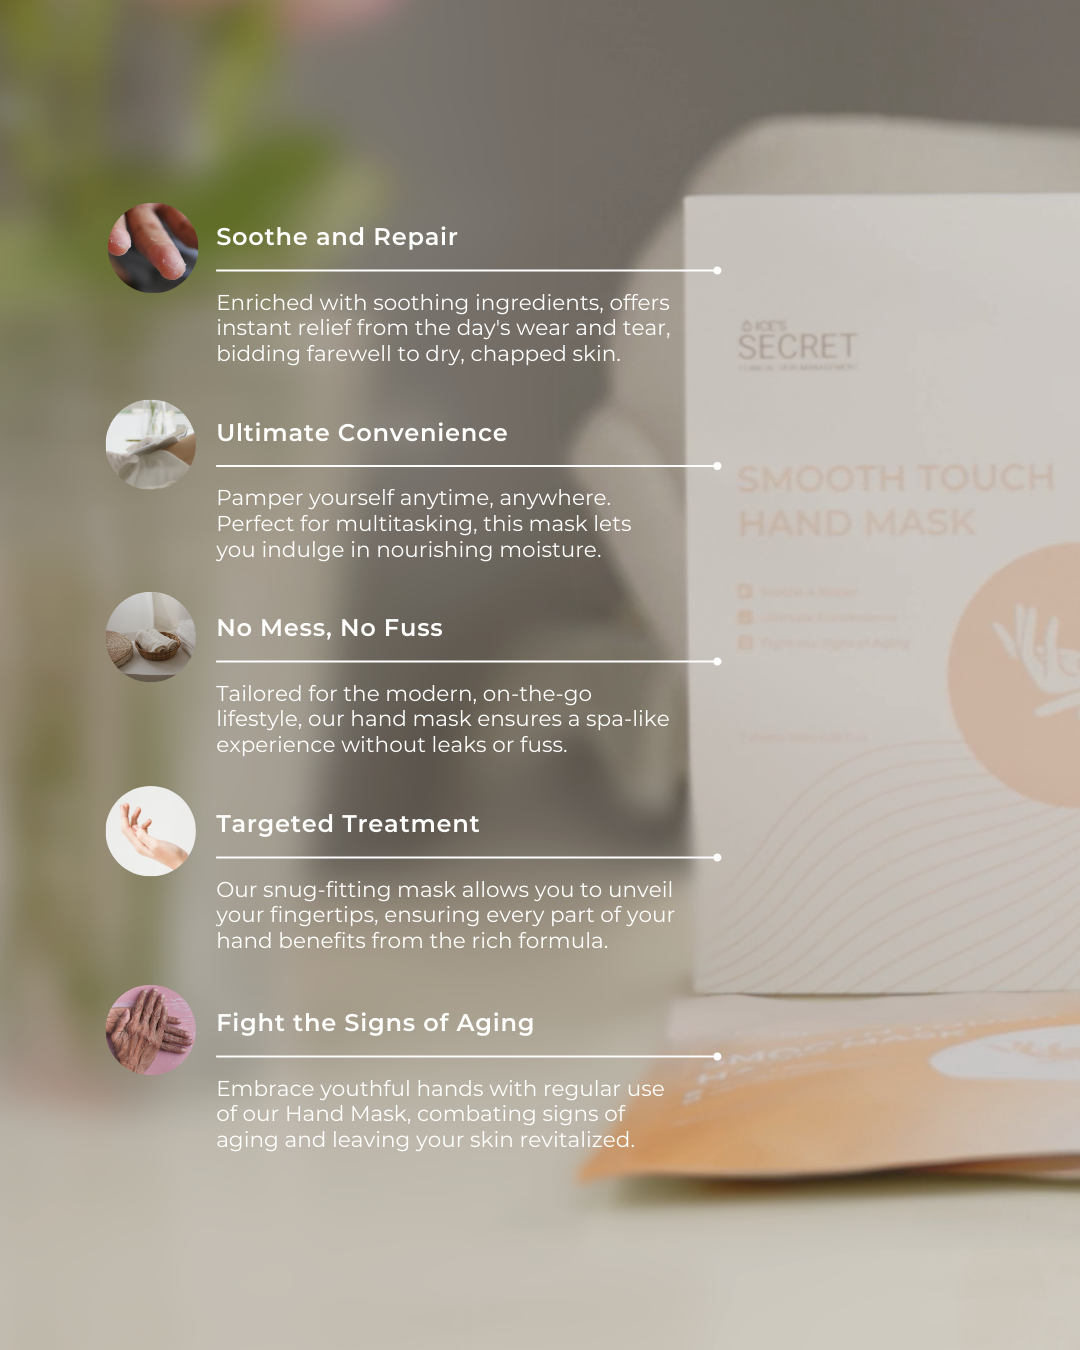 (Launch Special) Smooth Touch Hand Mask